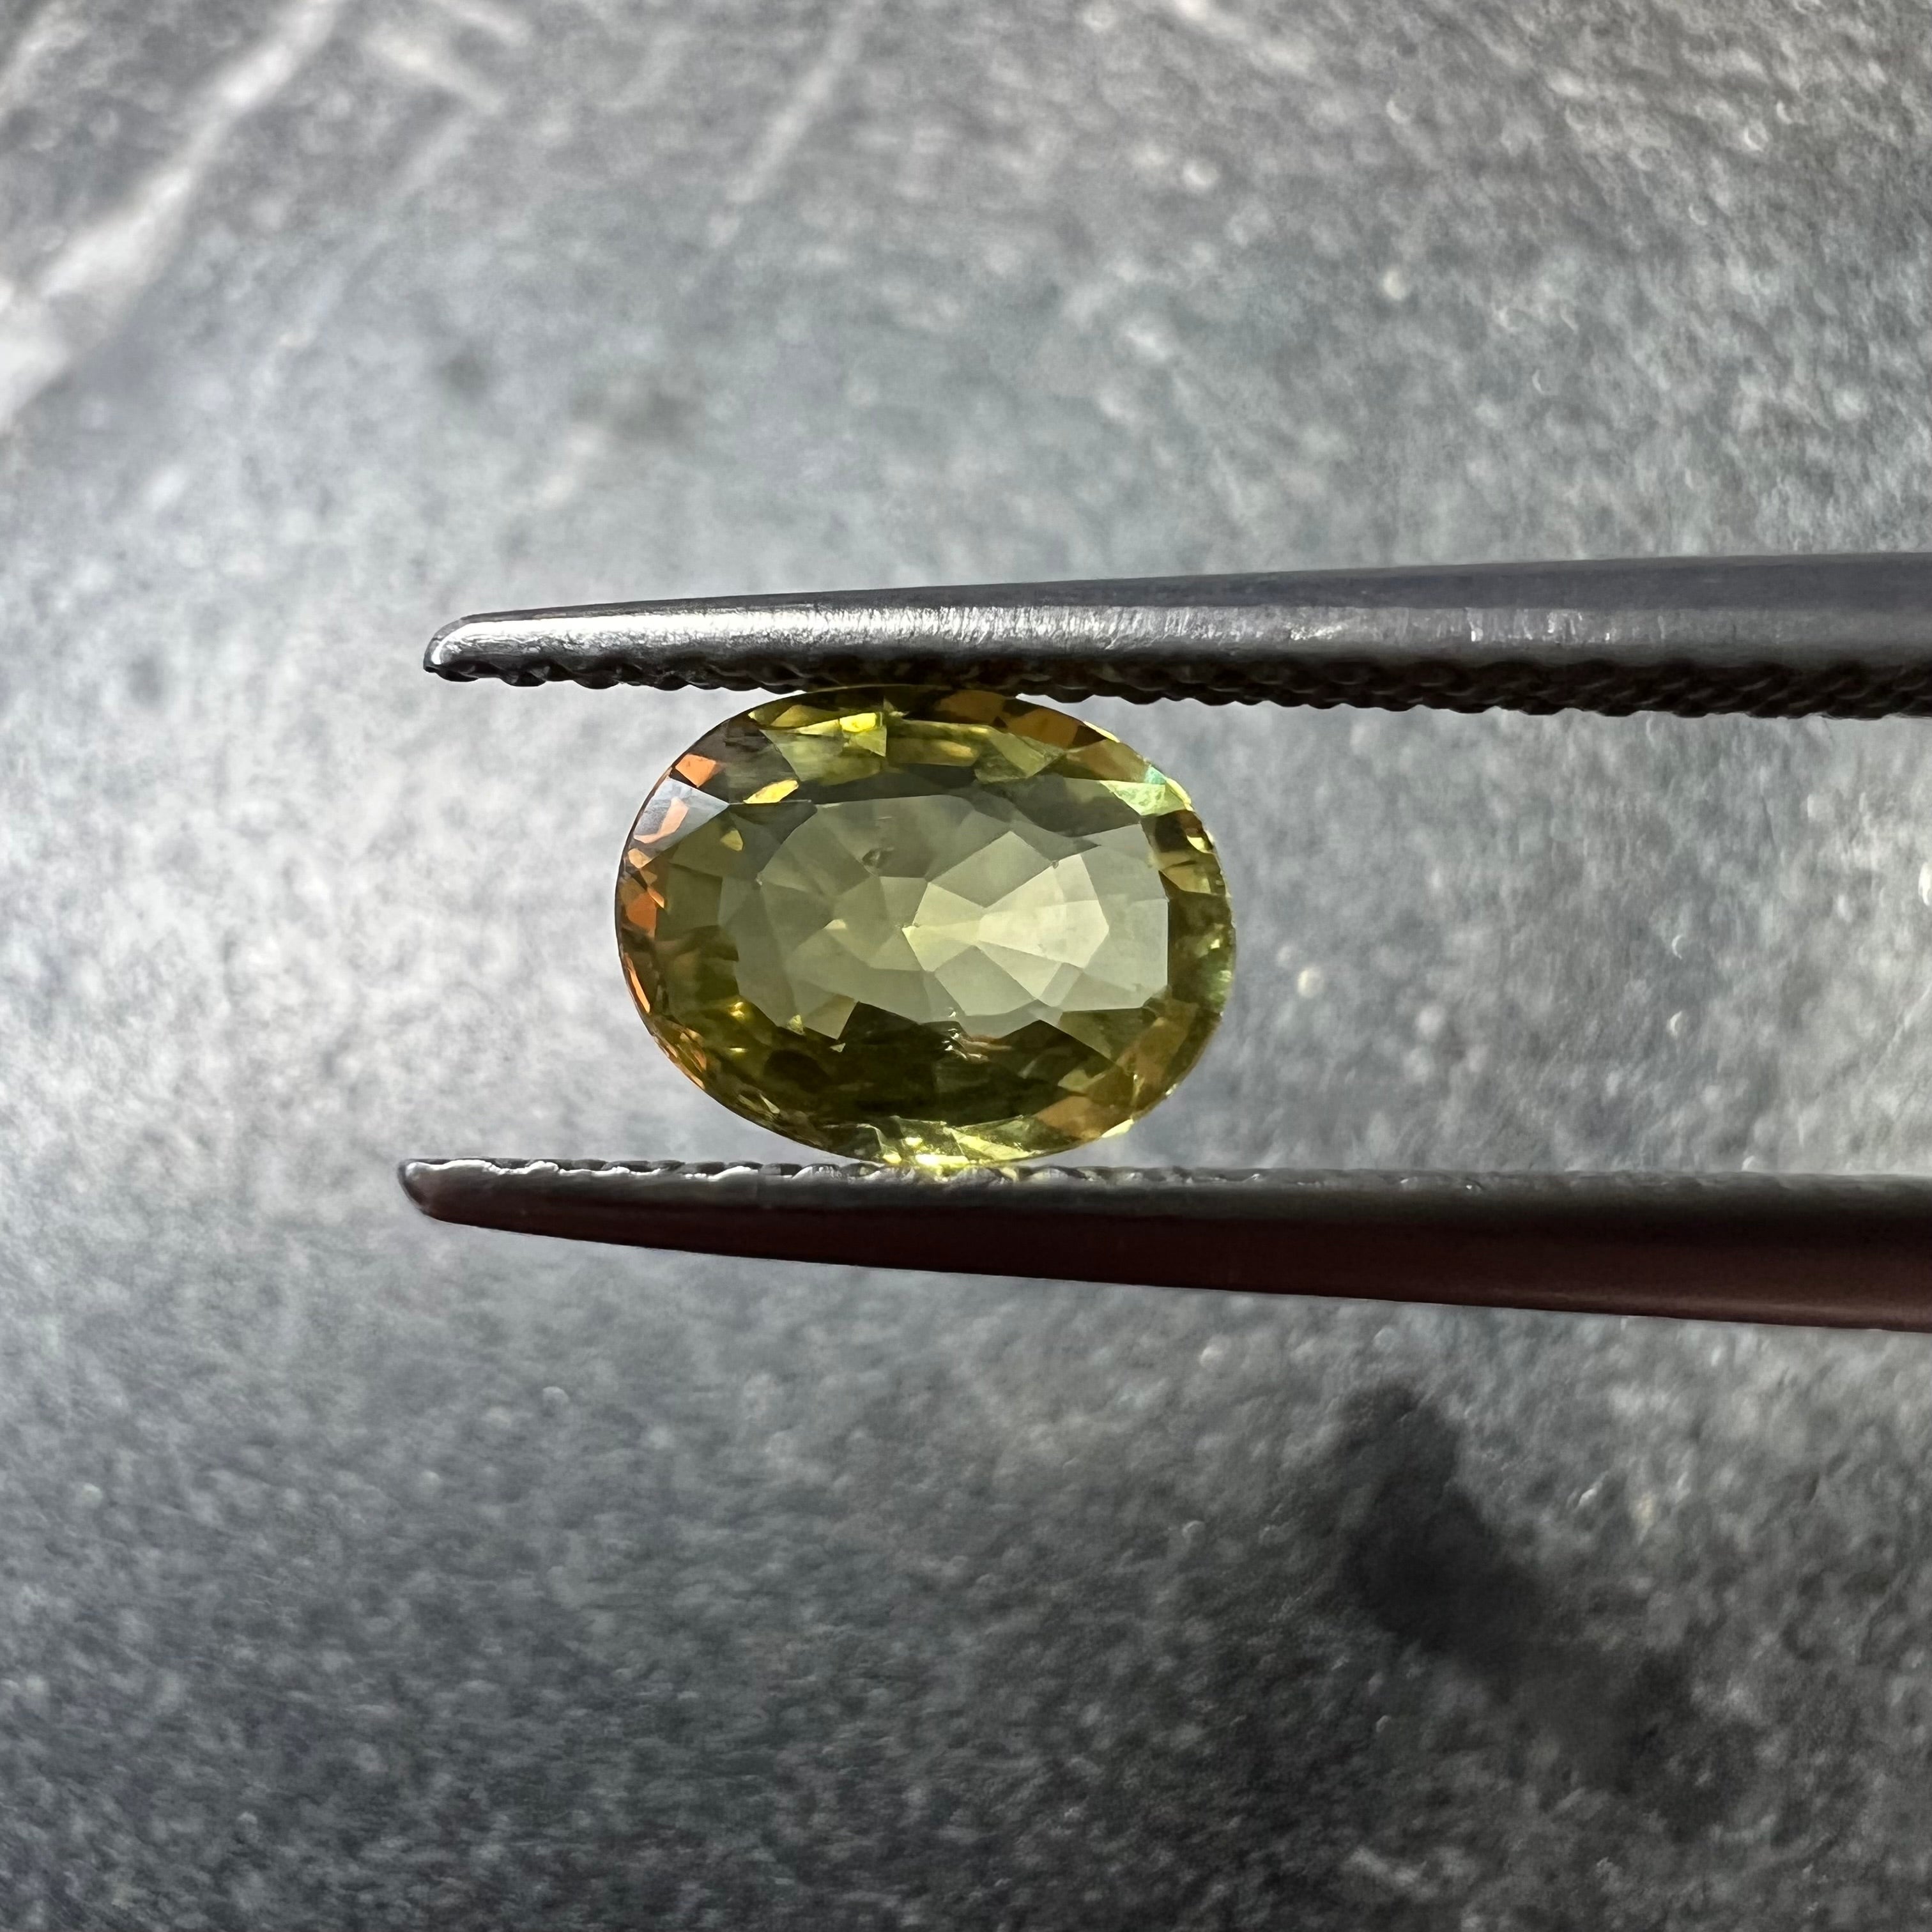 .97CTW Loose Yellow Oval Sapphire 6.96x5.42x2.70mm Earth mined Gemstone